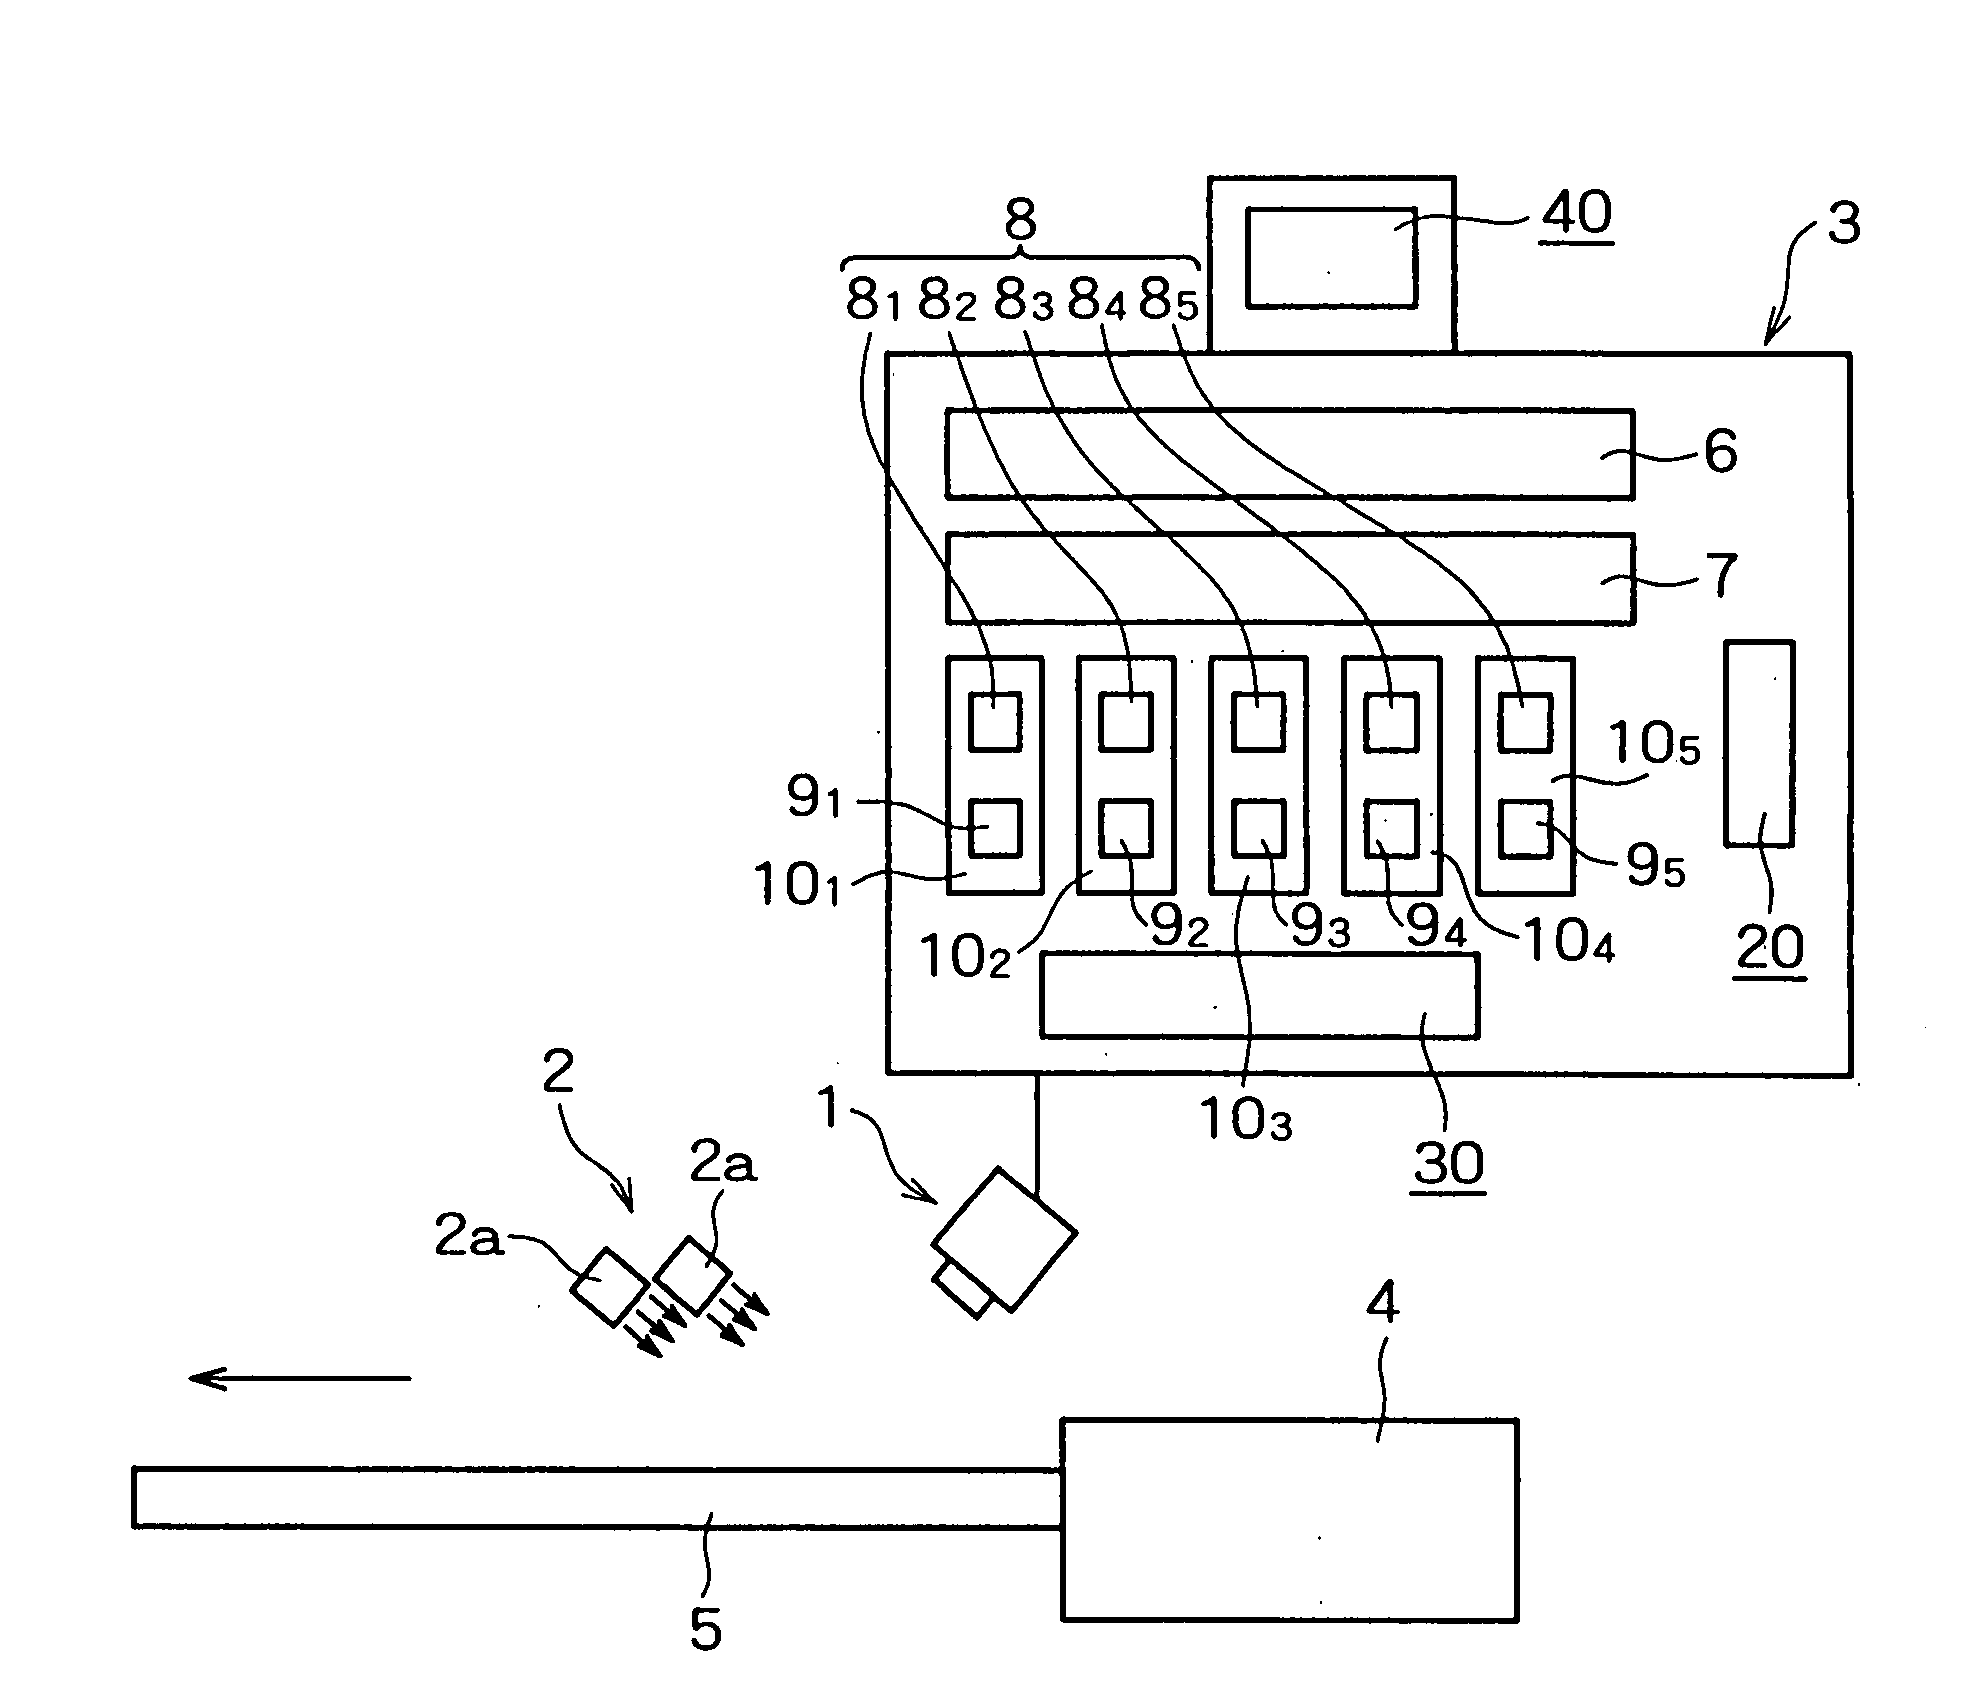 Article Visual Inspection Apparatus